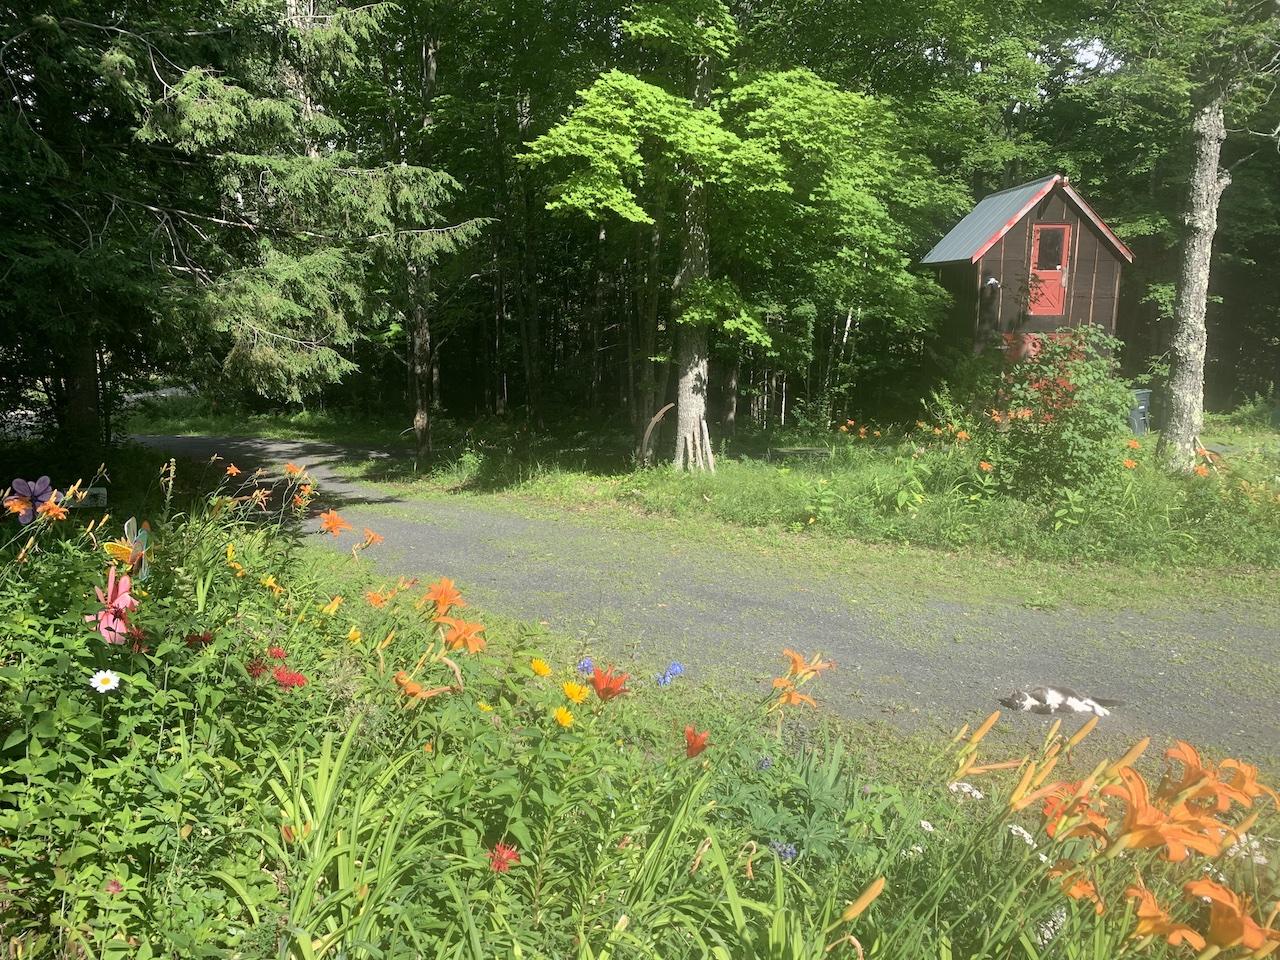 Welcome to a Vermont forest sanctuary